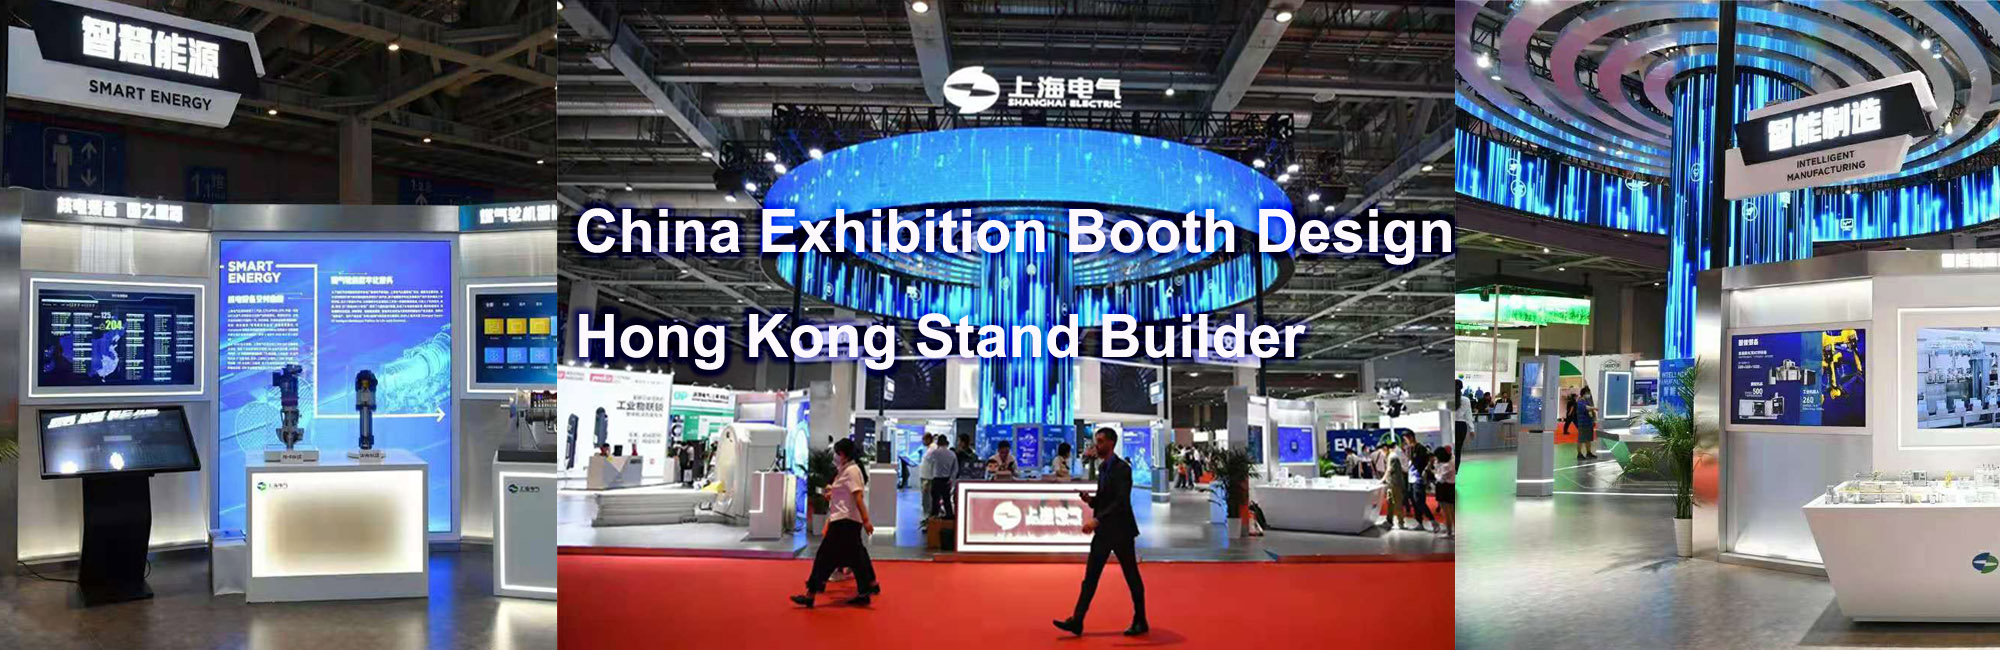 China exhibition booth design